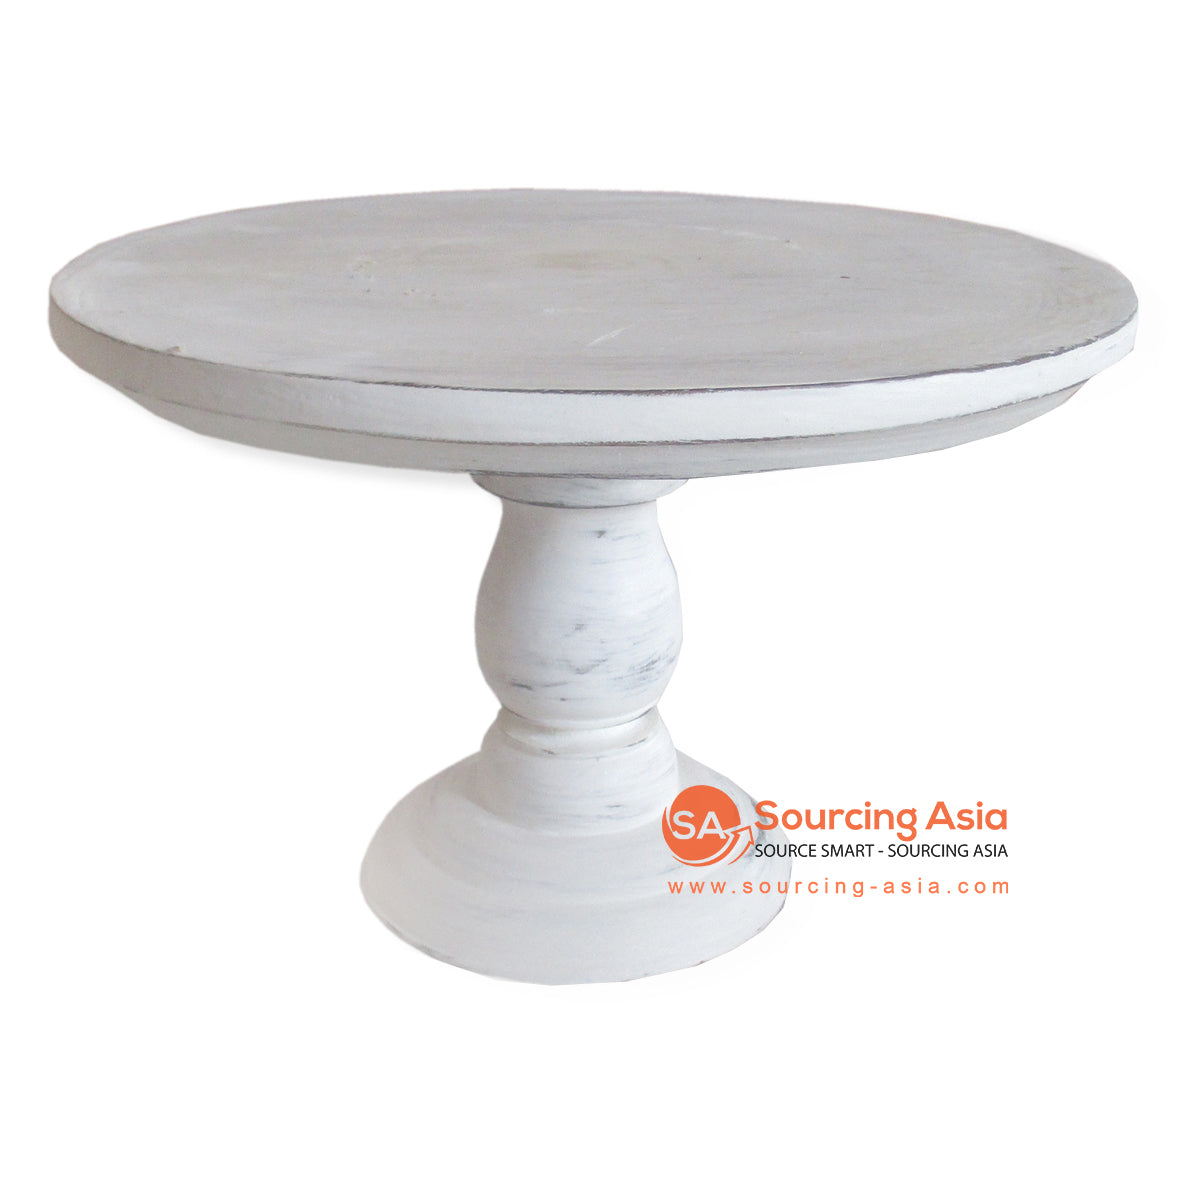 THE176 WHITE WASH WOODEN "DULANG" TRAY